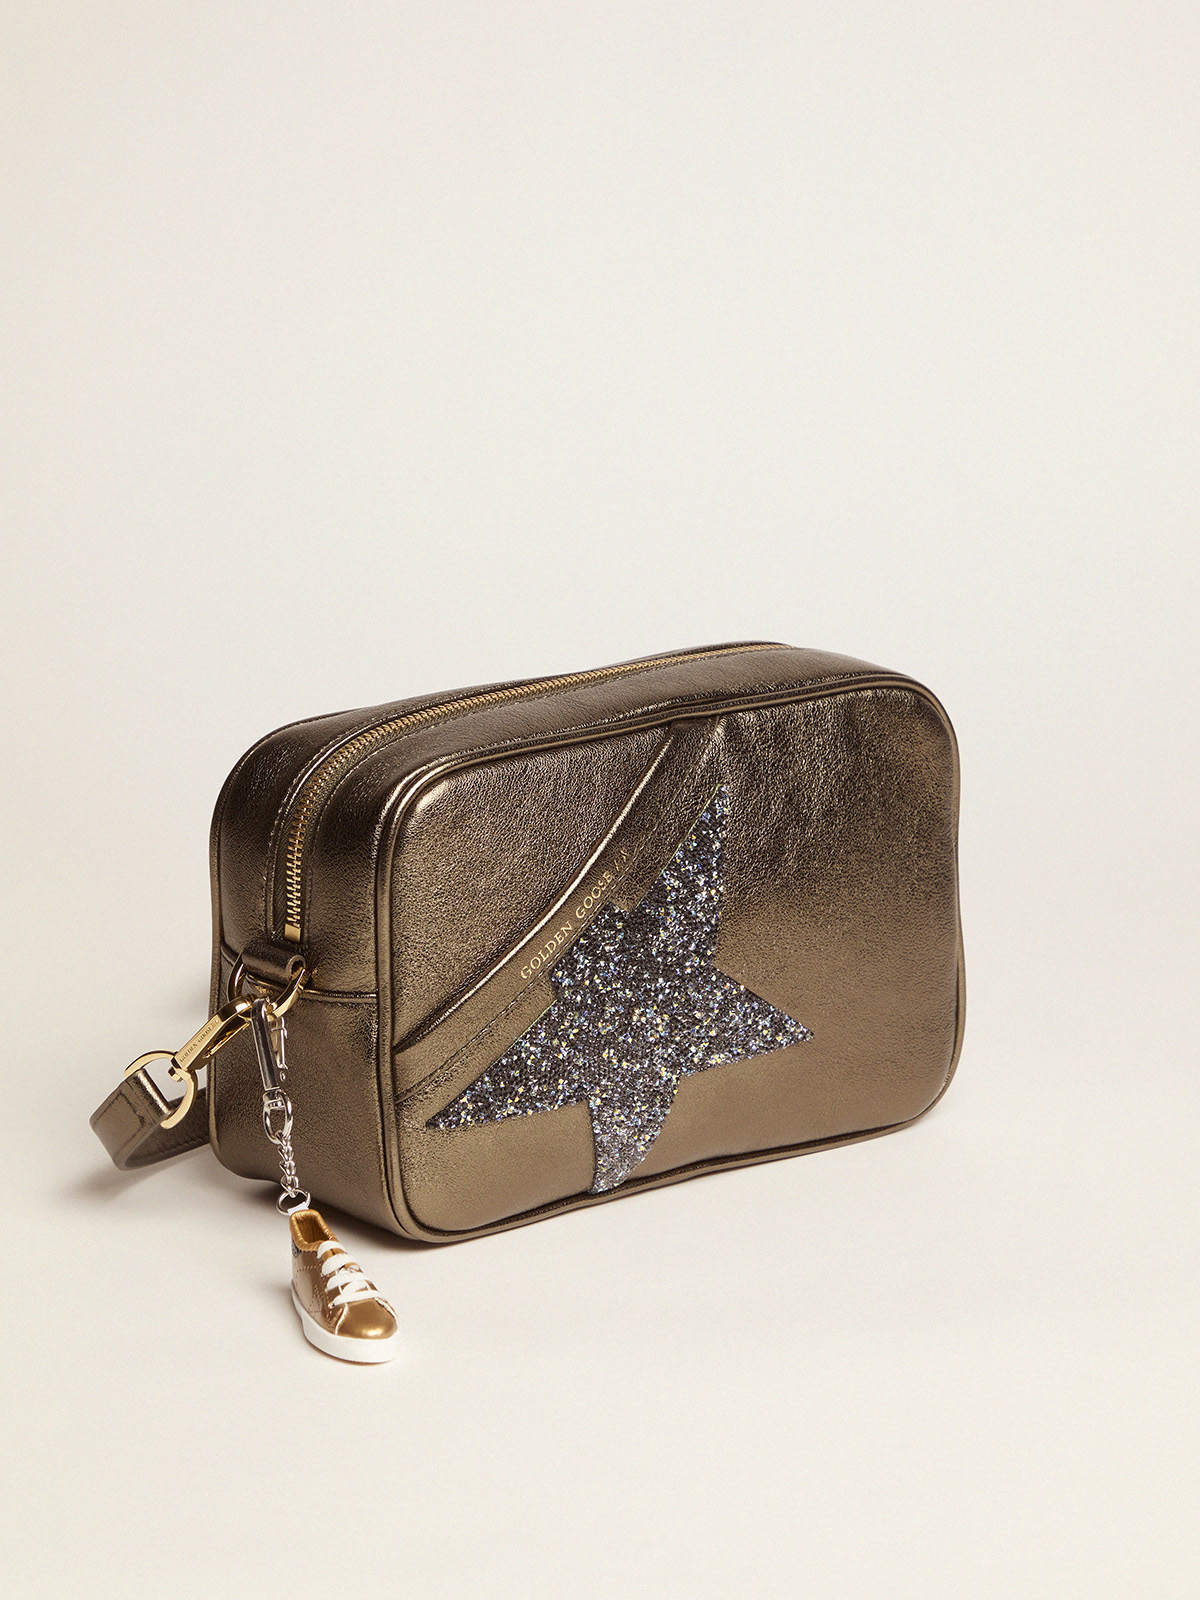 Silver Star Bag made of laminated leather with Swarovski star